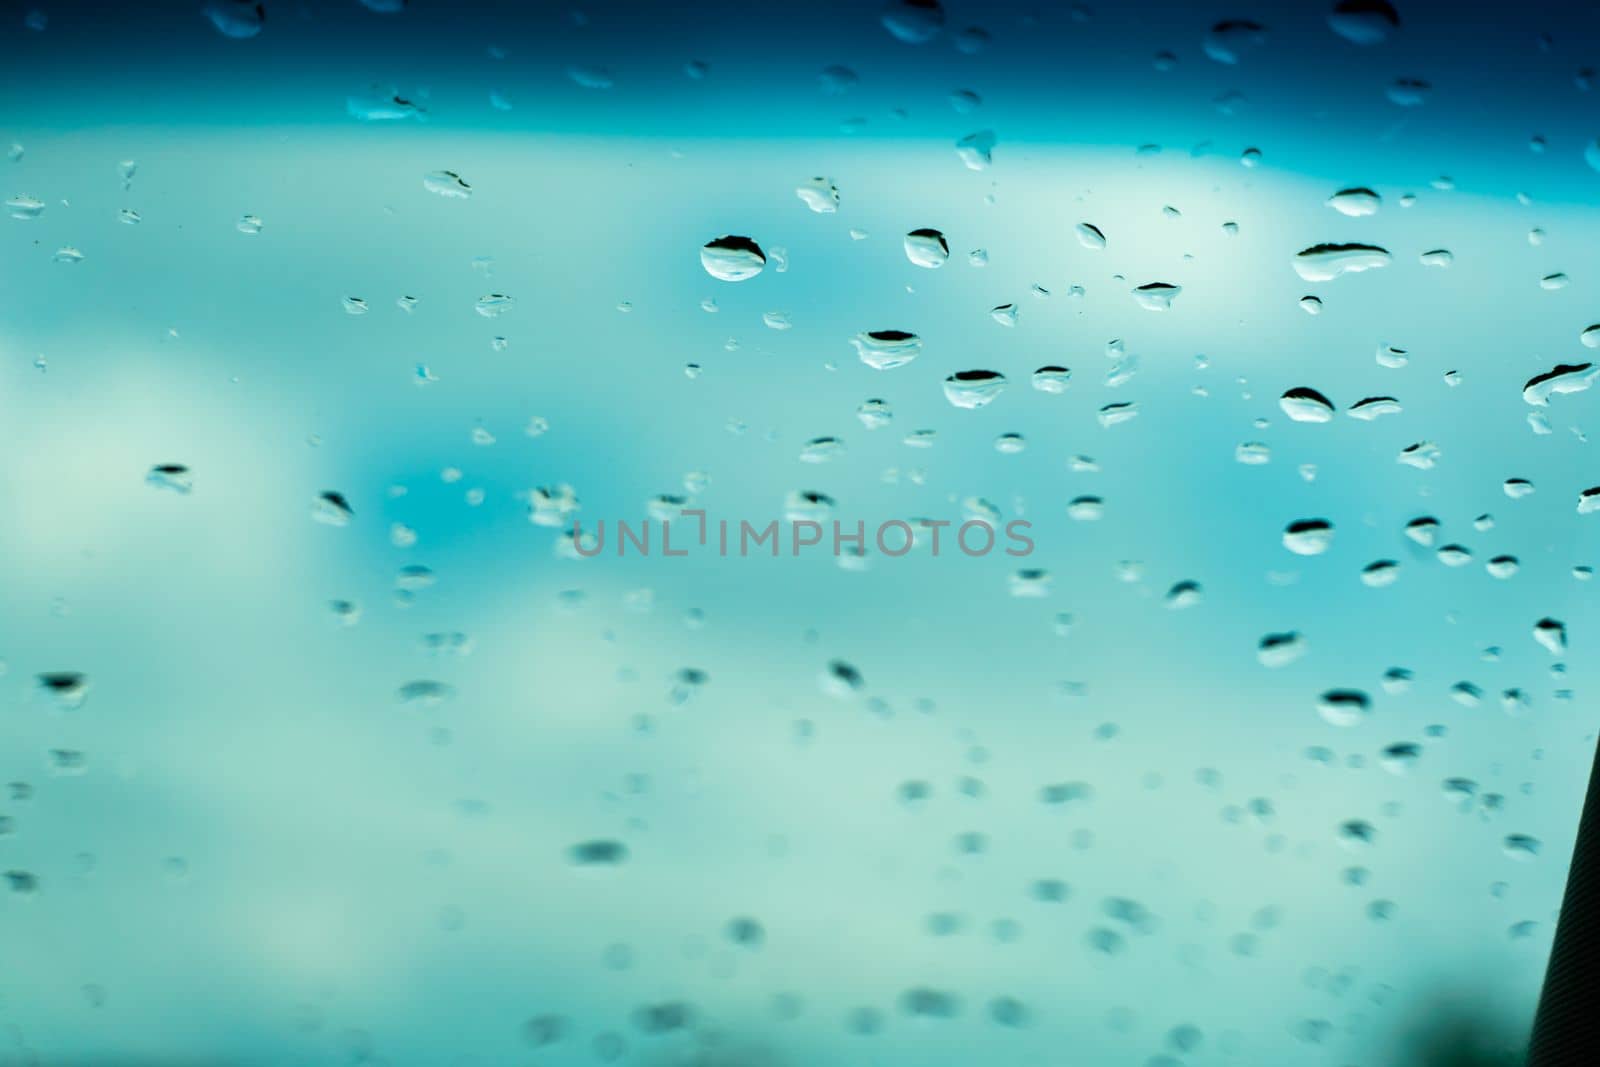 Raindrops on glass against blue sky. Window view background screensaver. Place for text banner.